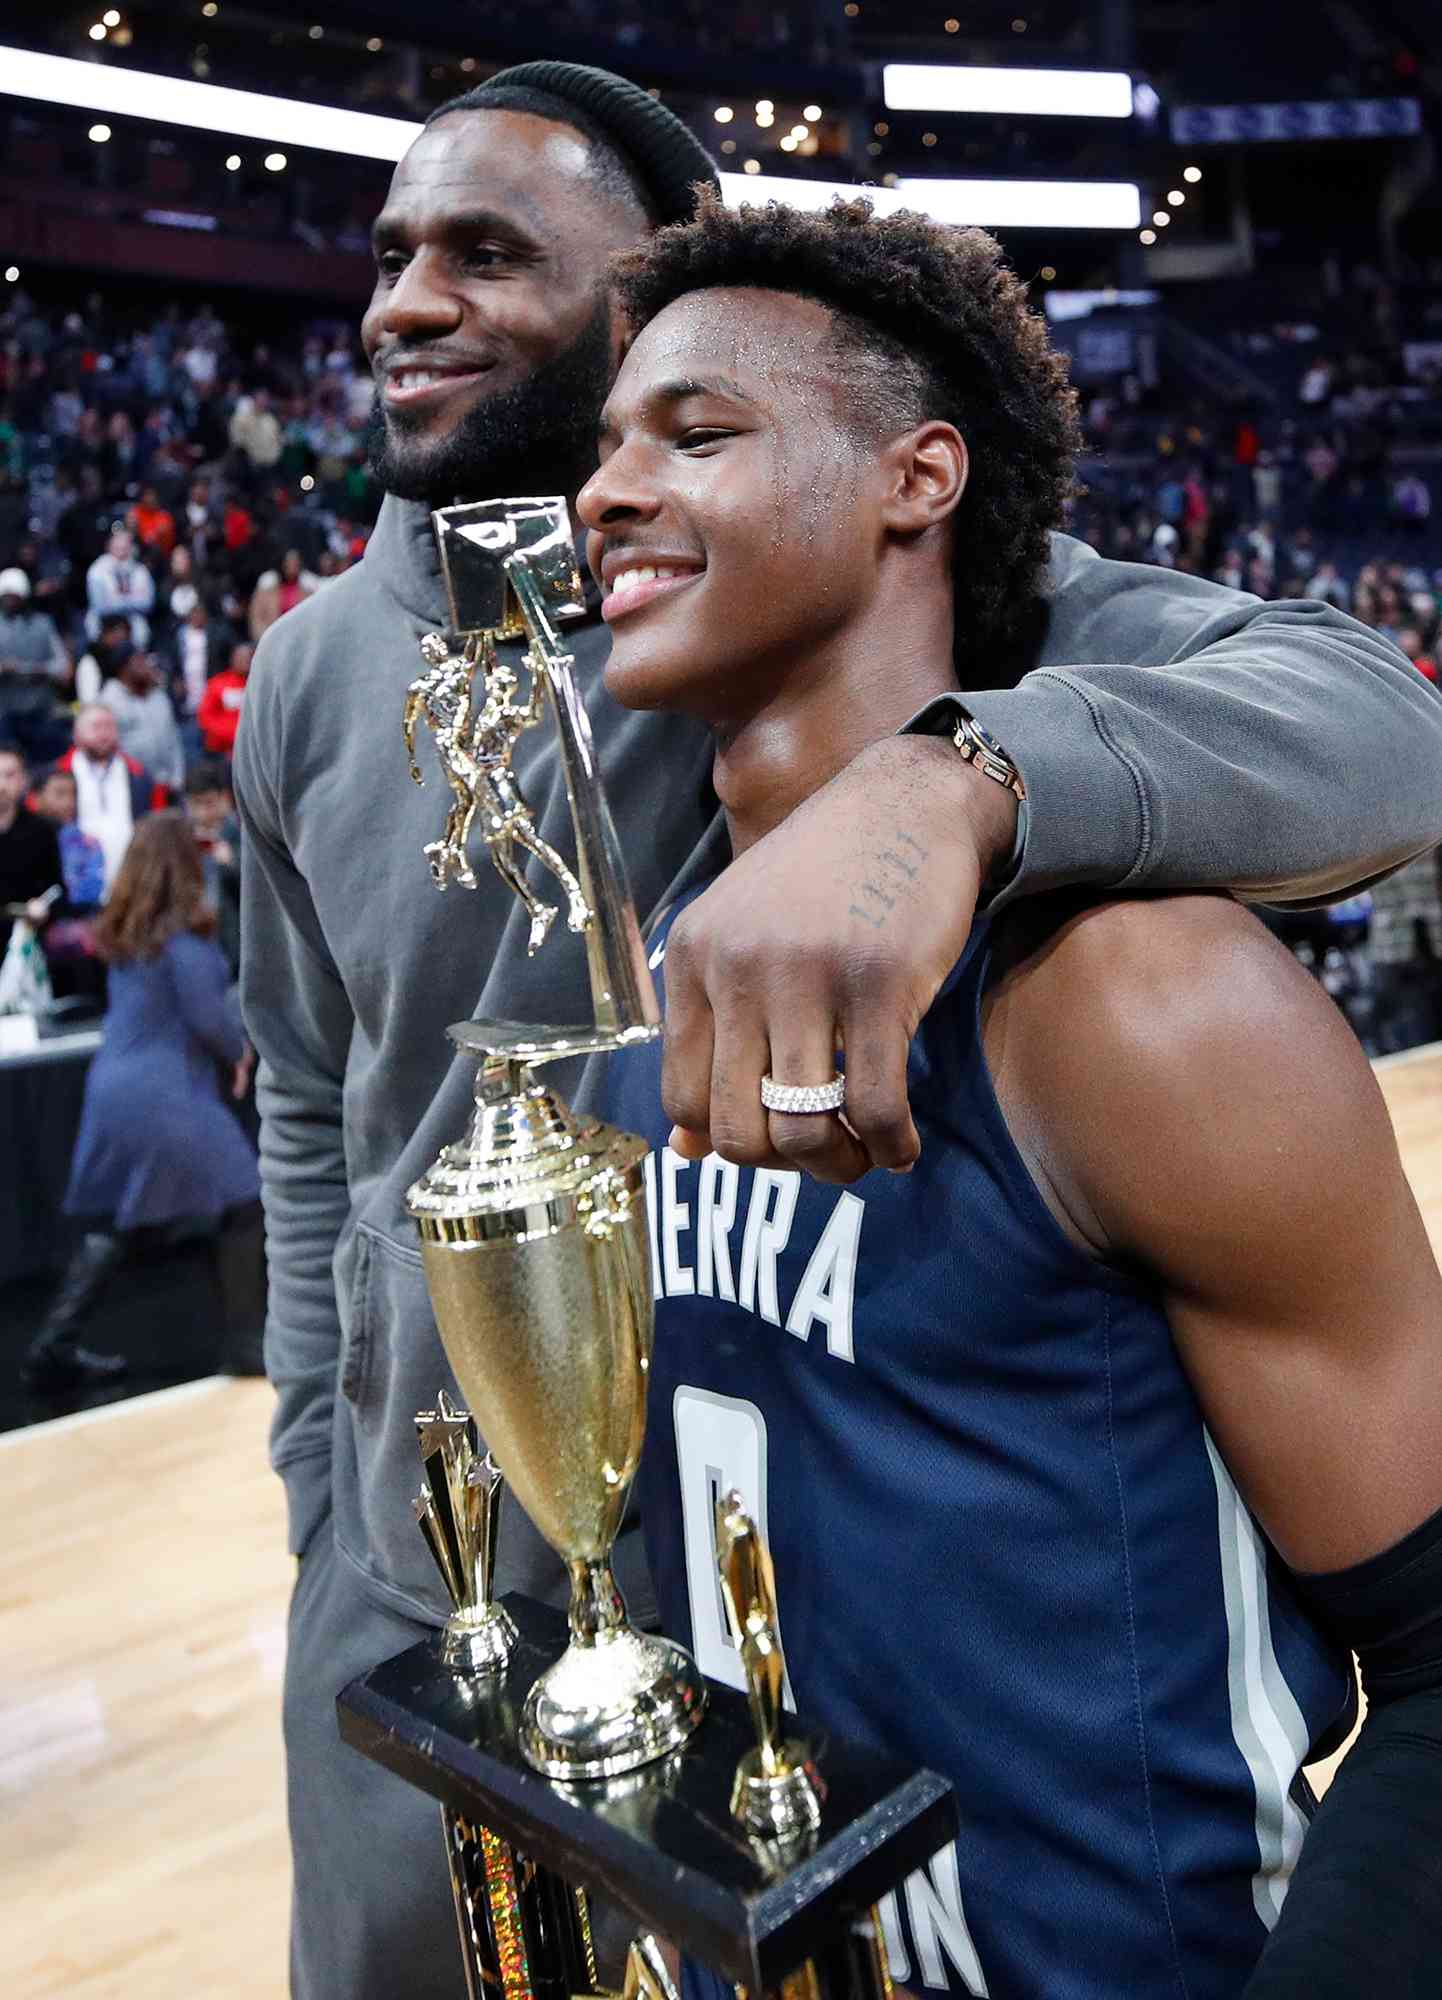 LeBron 'Bronny' James Jr. #0 of Sierra Canyon High School with his father LeBron James of the Los Angeles Lakers